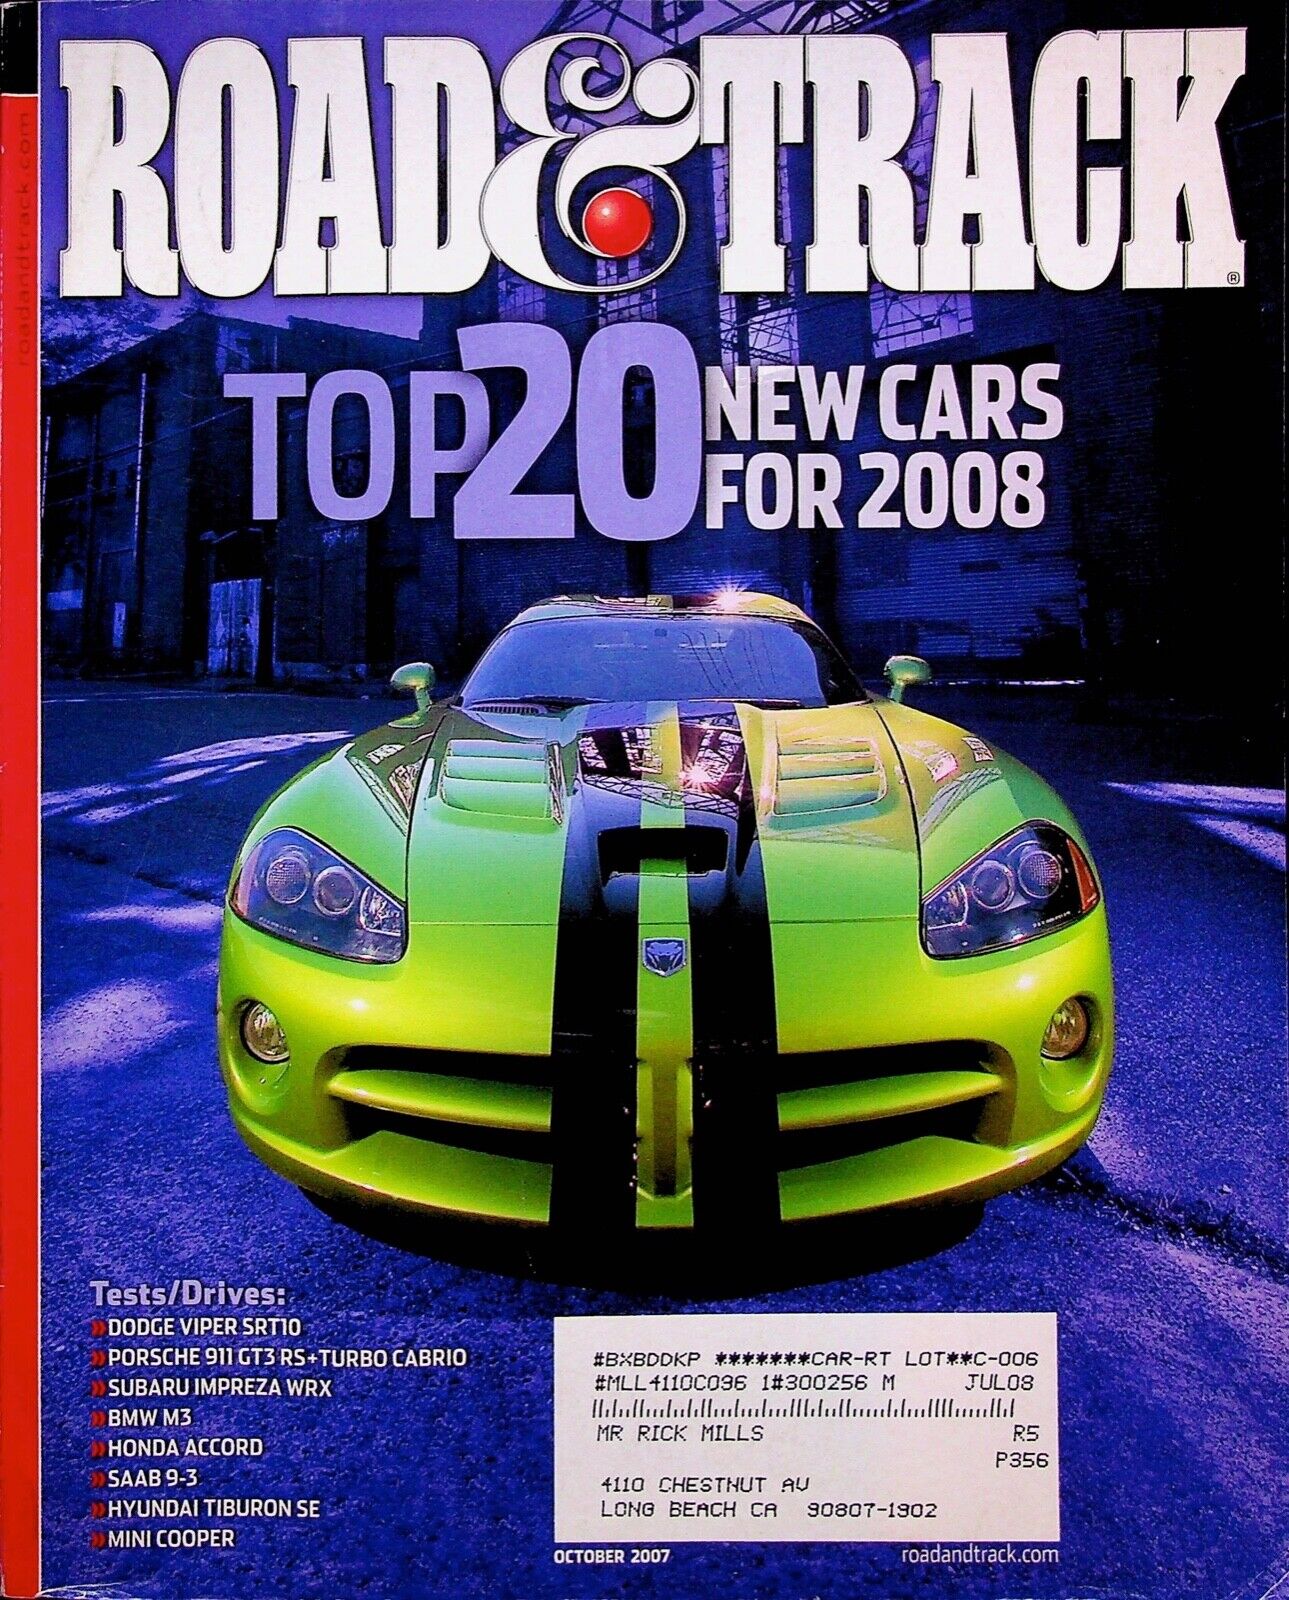 TOP20  NEW CARS FOR 2008 - ROAD & TRACK MAGAZINE - OCTOBER 2007